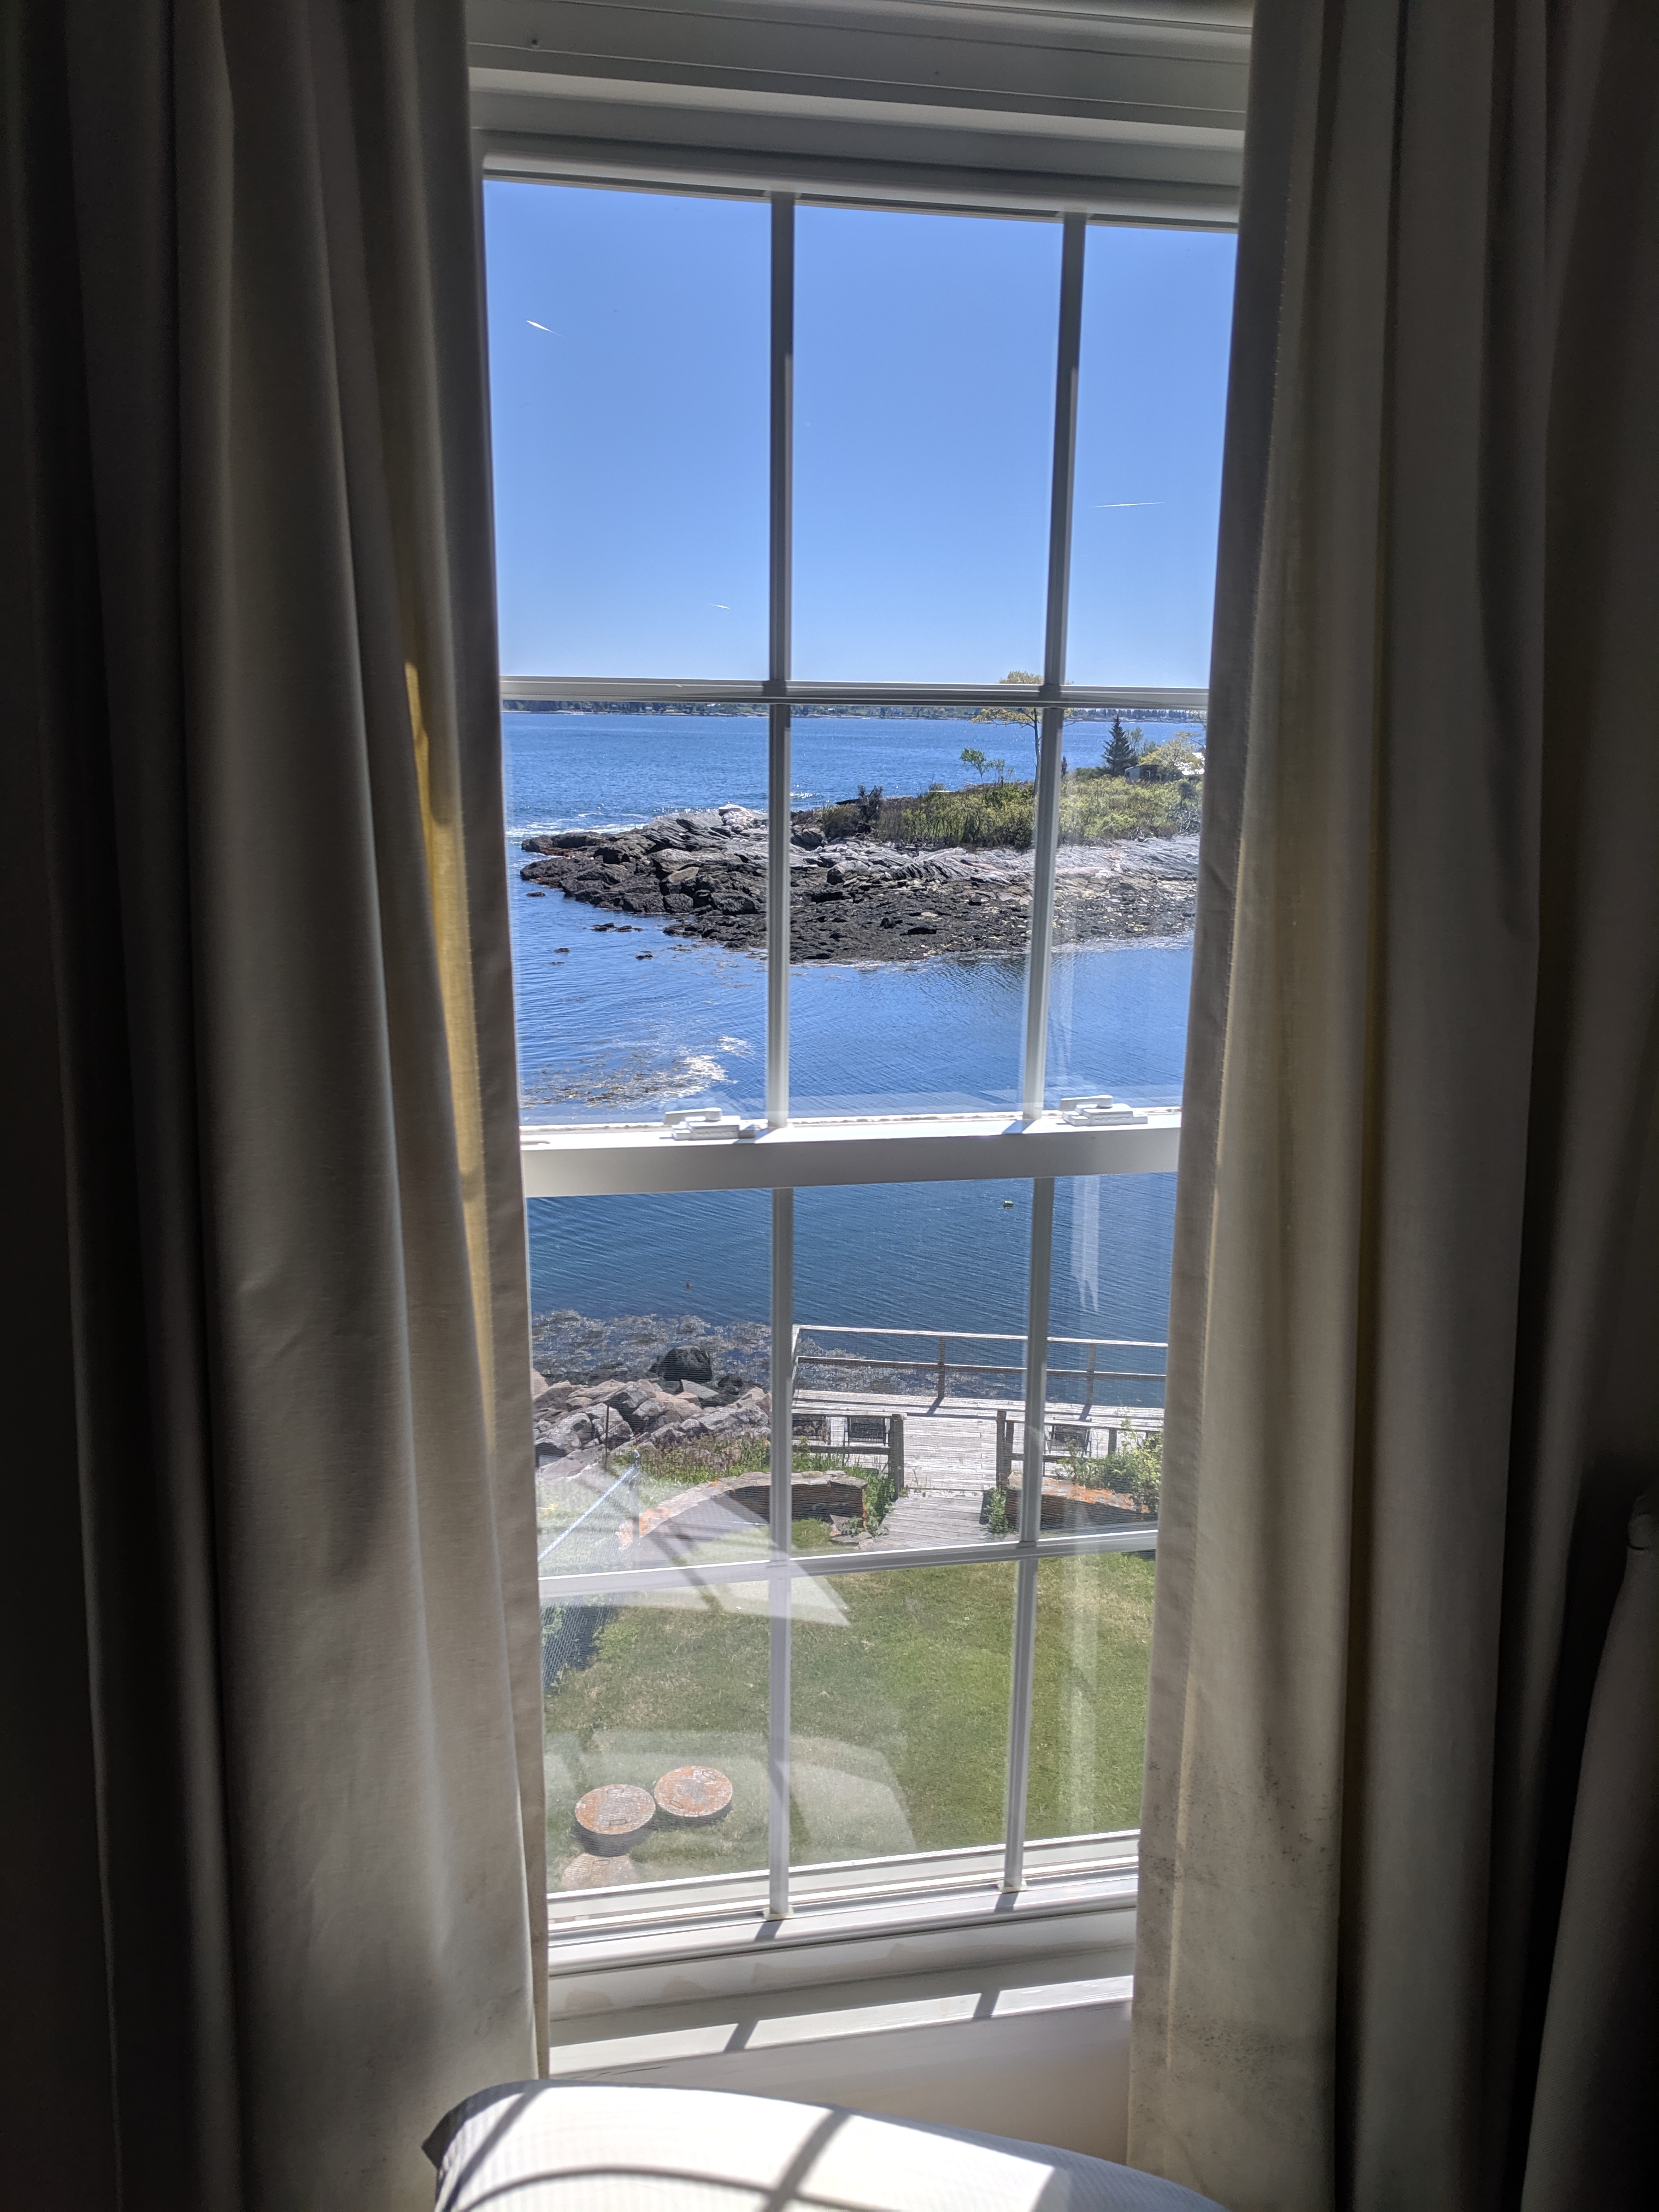 Decorative image of a sunny window opening on a rough ocean shore